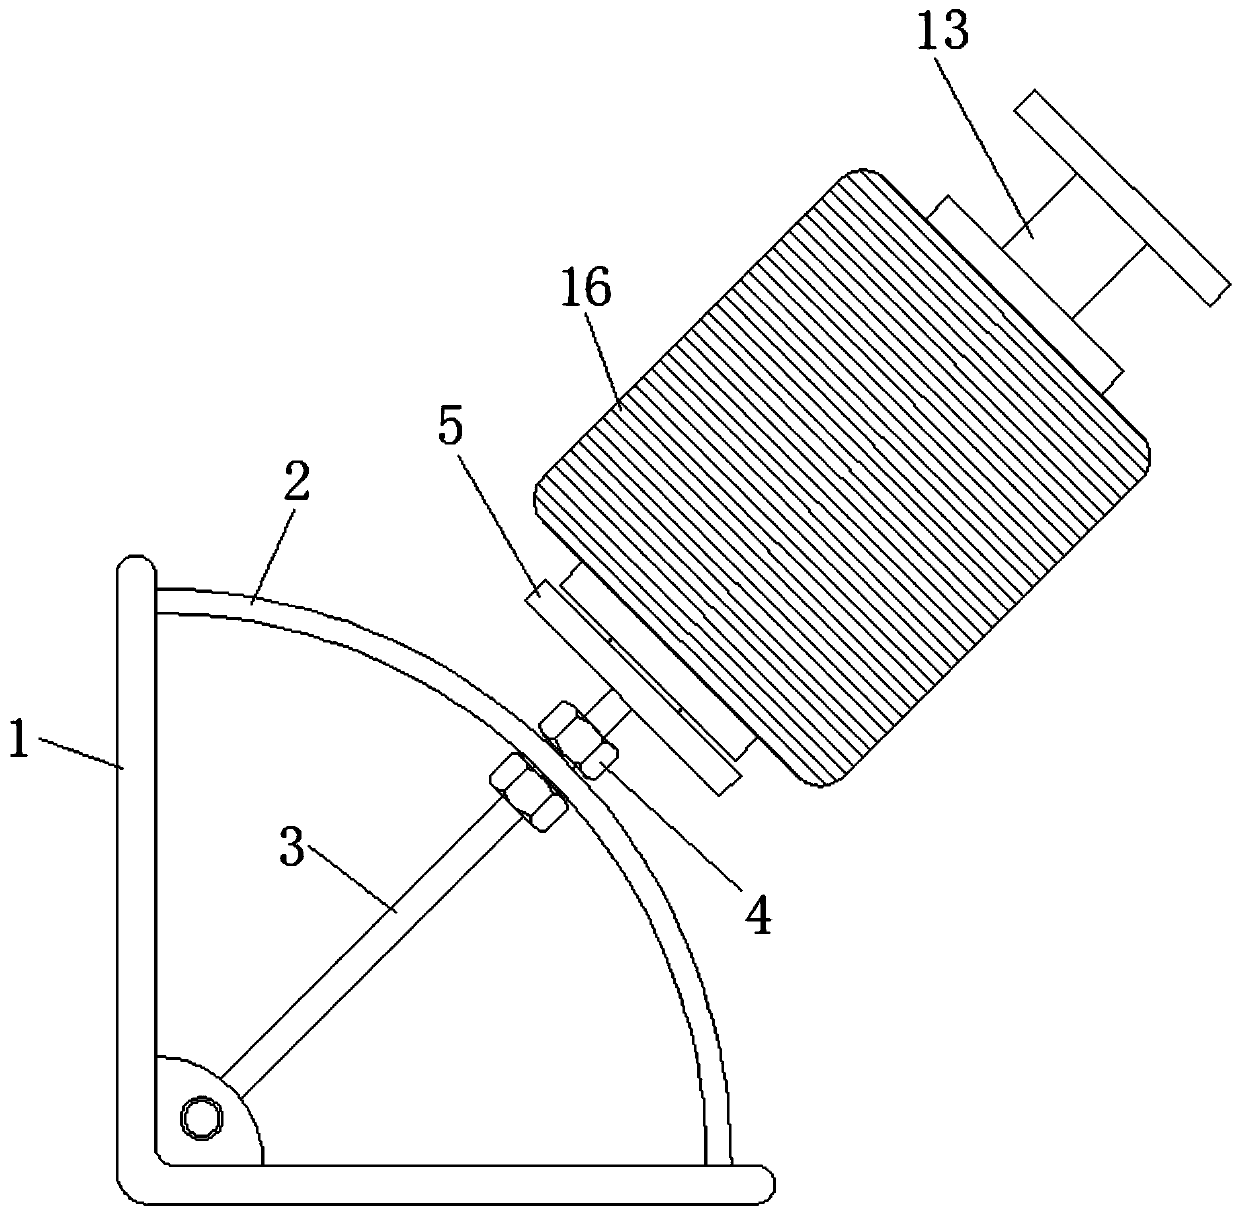 Textile bobbin placing device based on extrusion limit